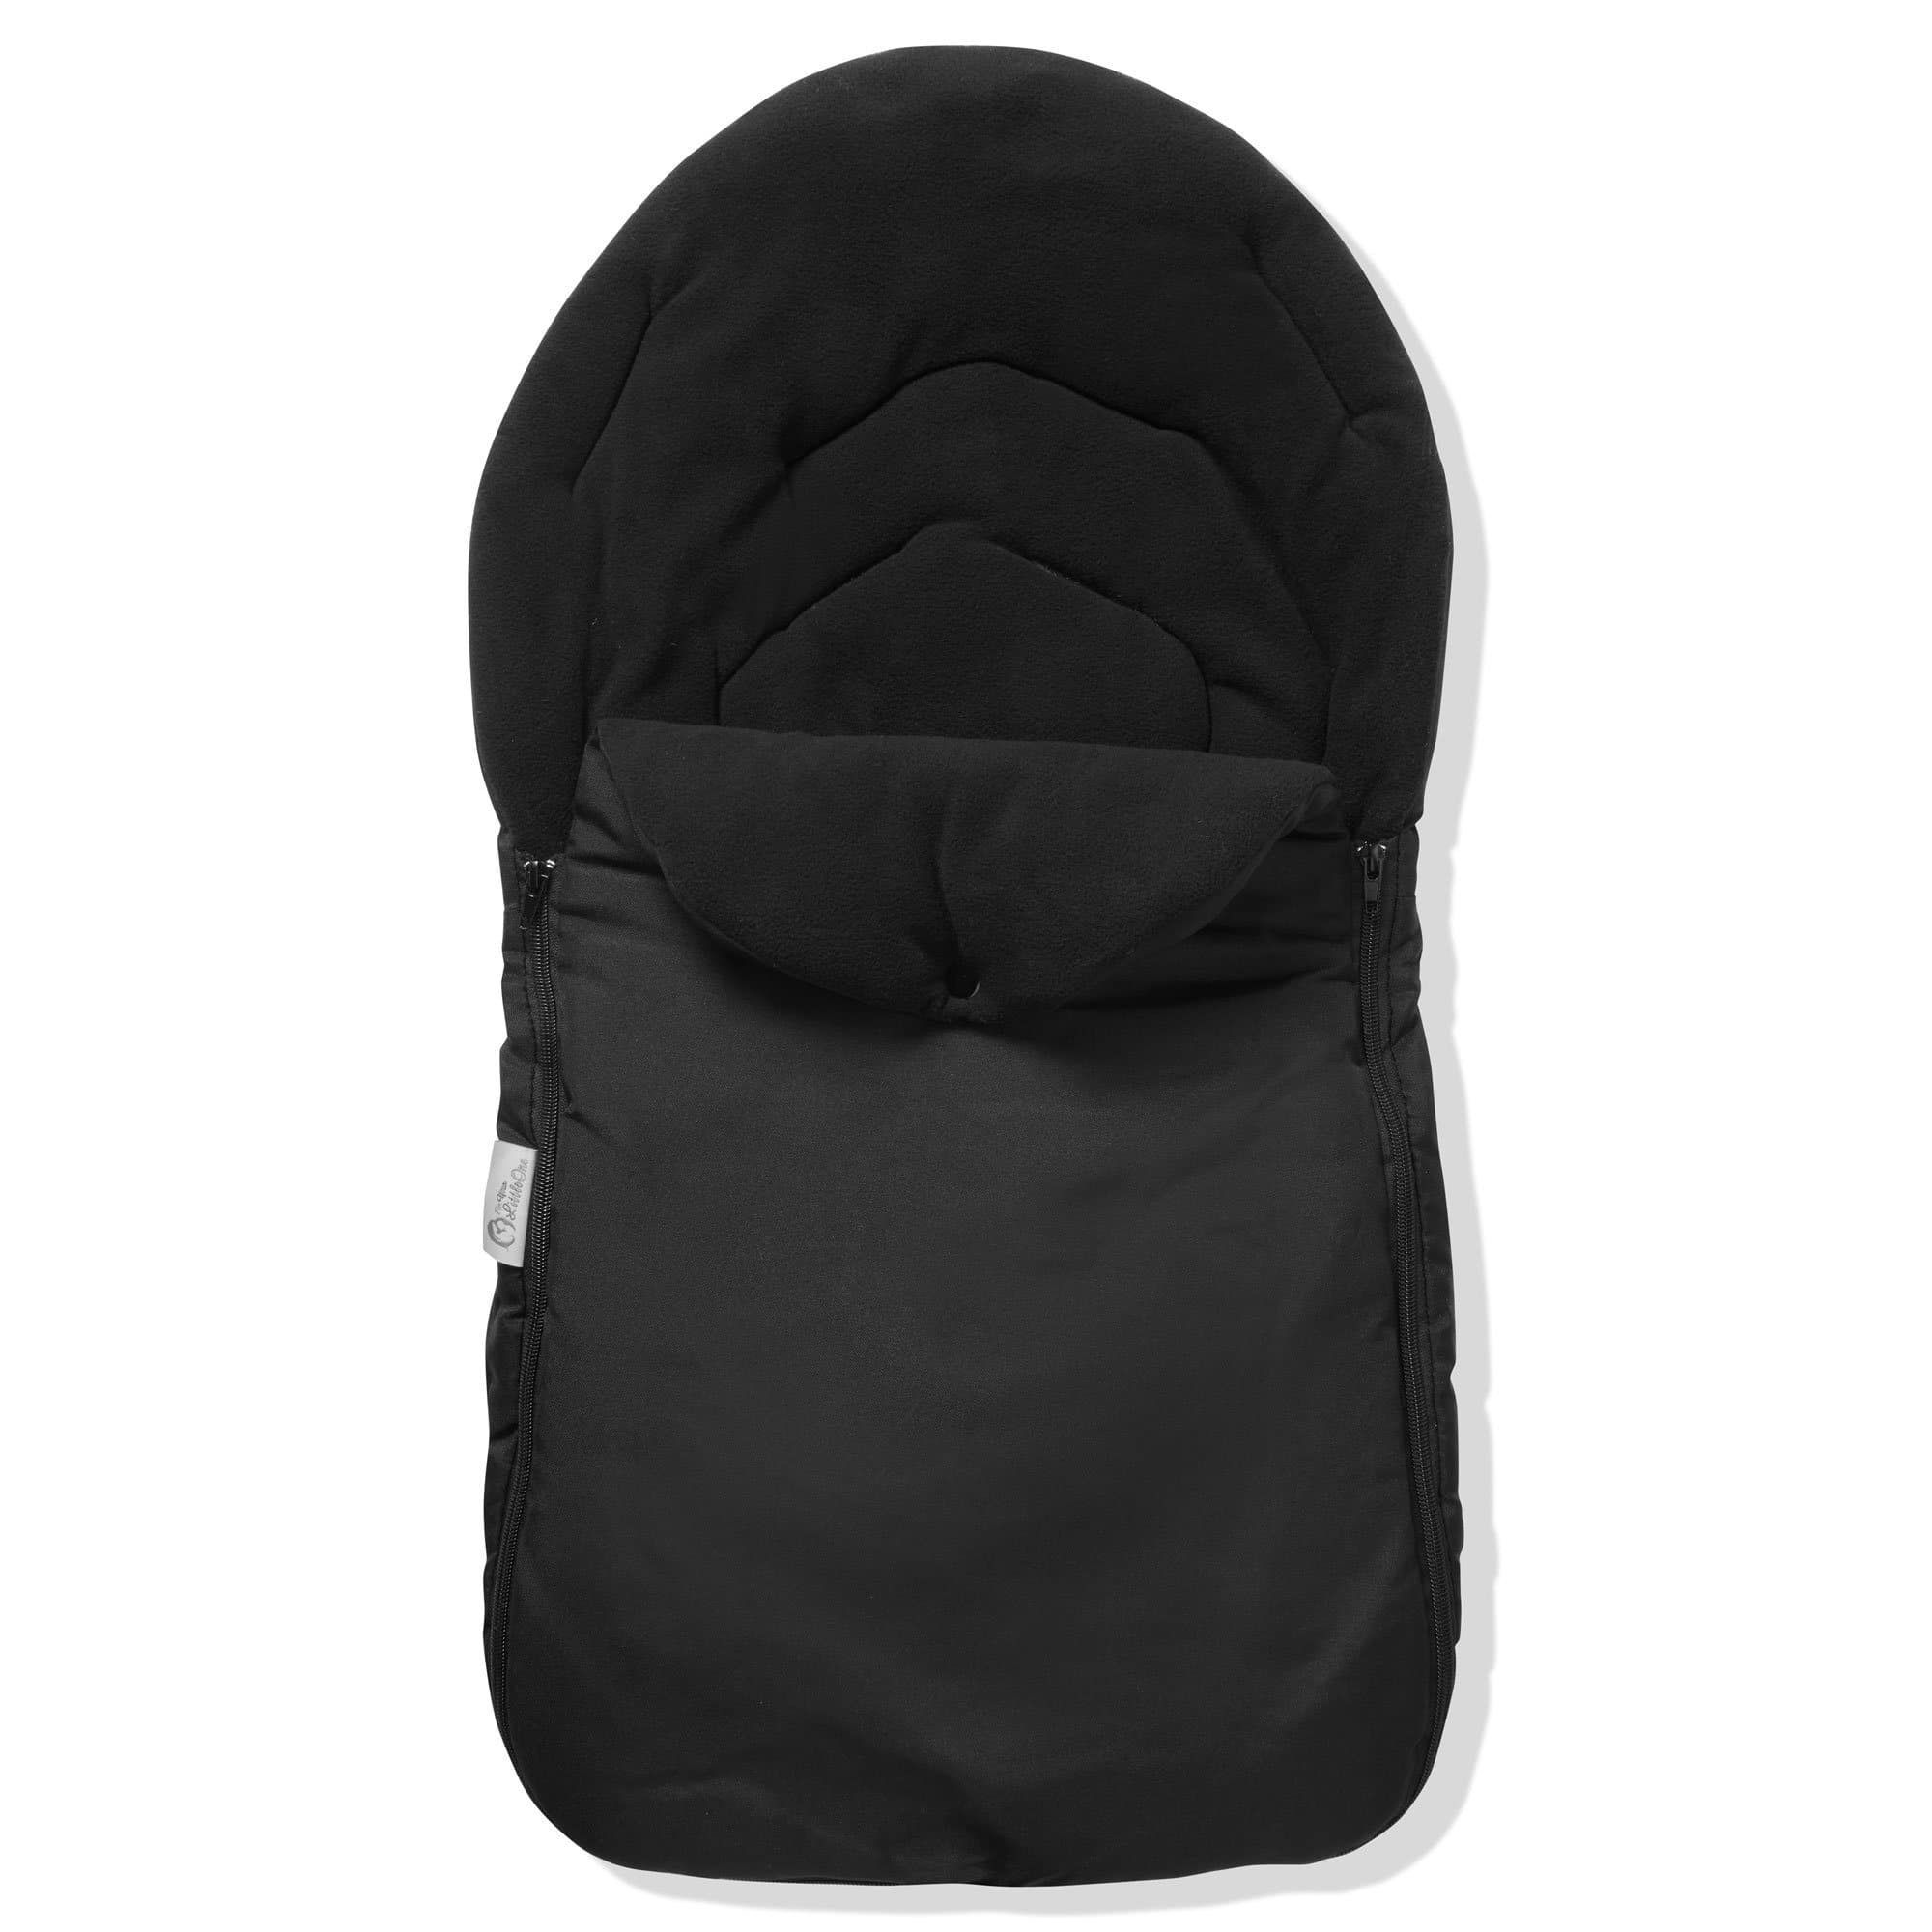 Car Seat Footmuff / Cosy Toes Compatible with Cybex - Black / Fits All Models | For Your Little One